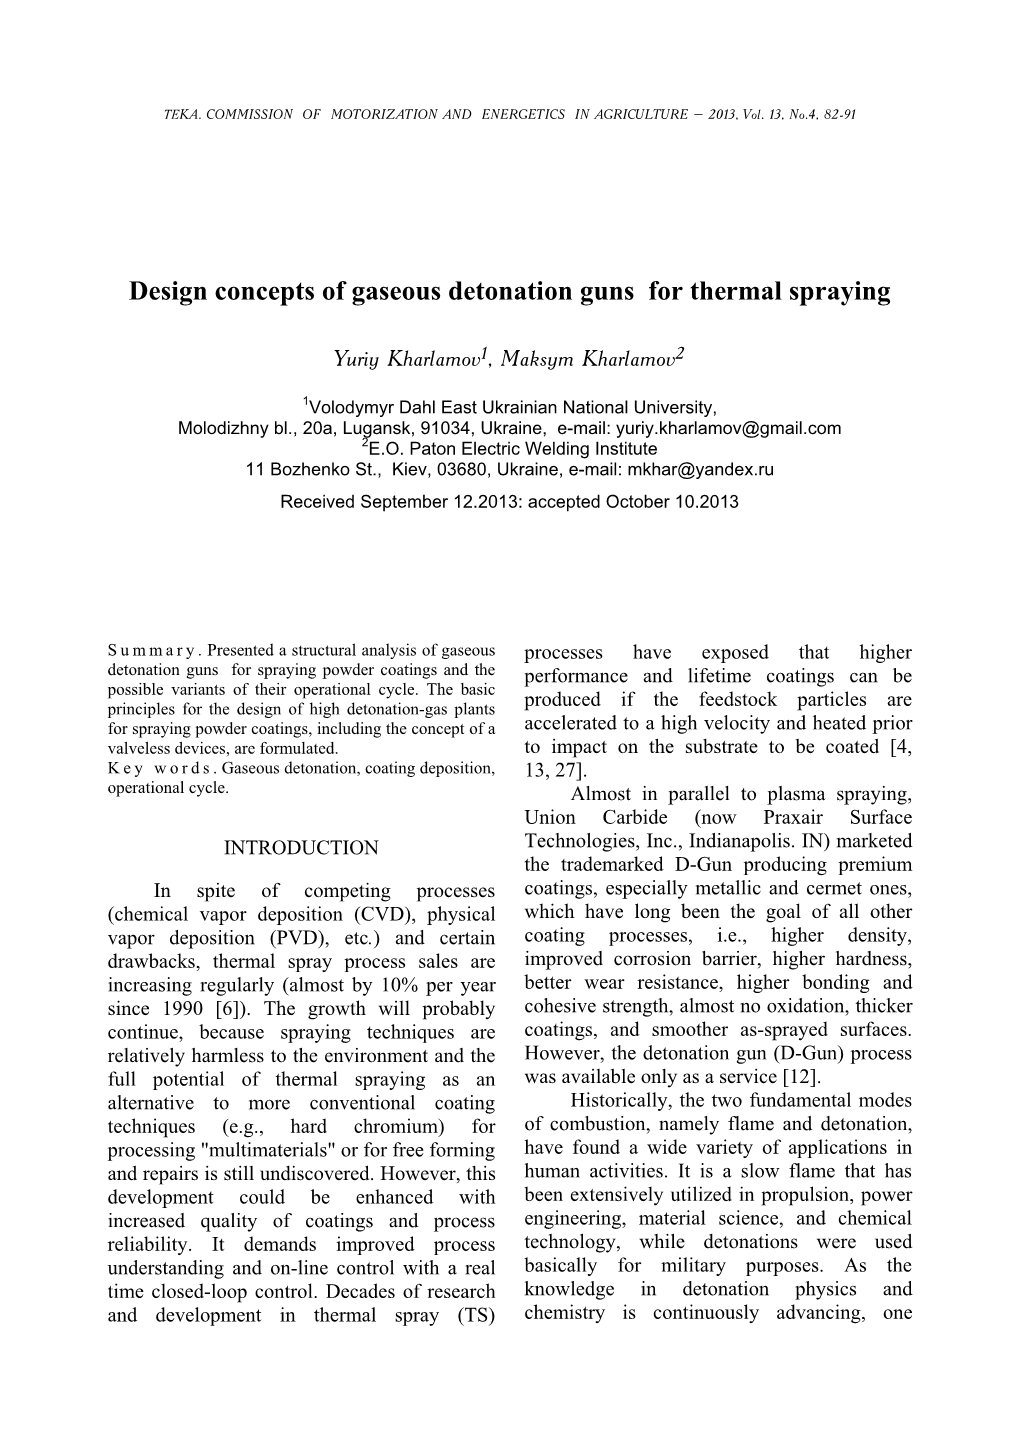 Design Concepts of Gaseous Detonation Guns for Thermal Spraying